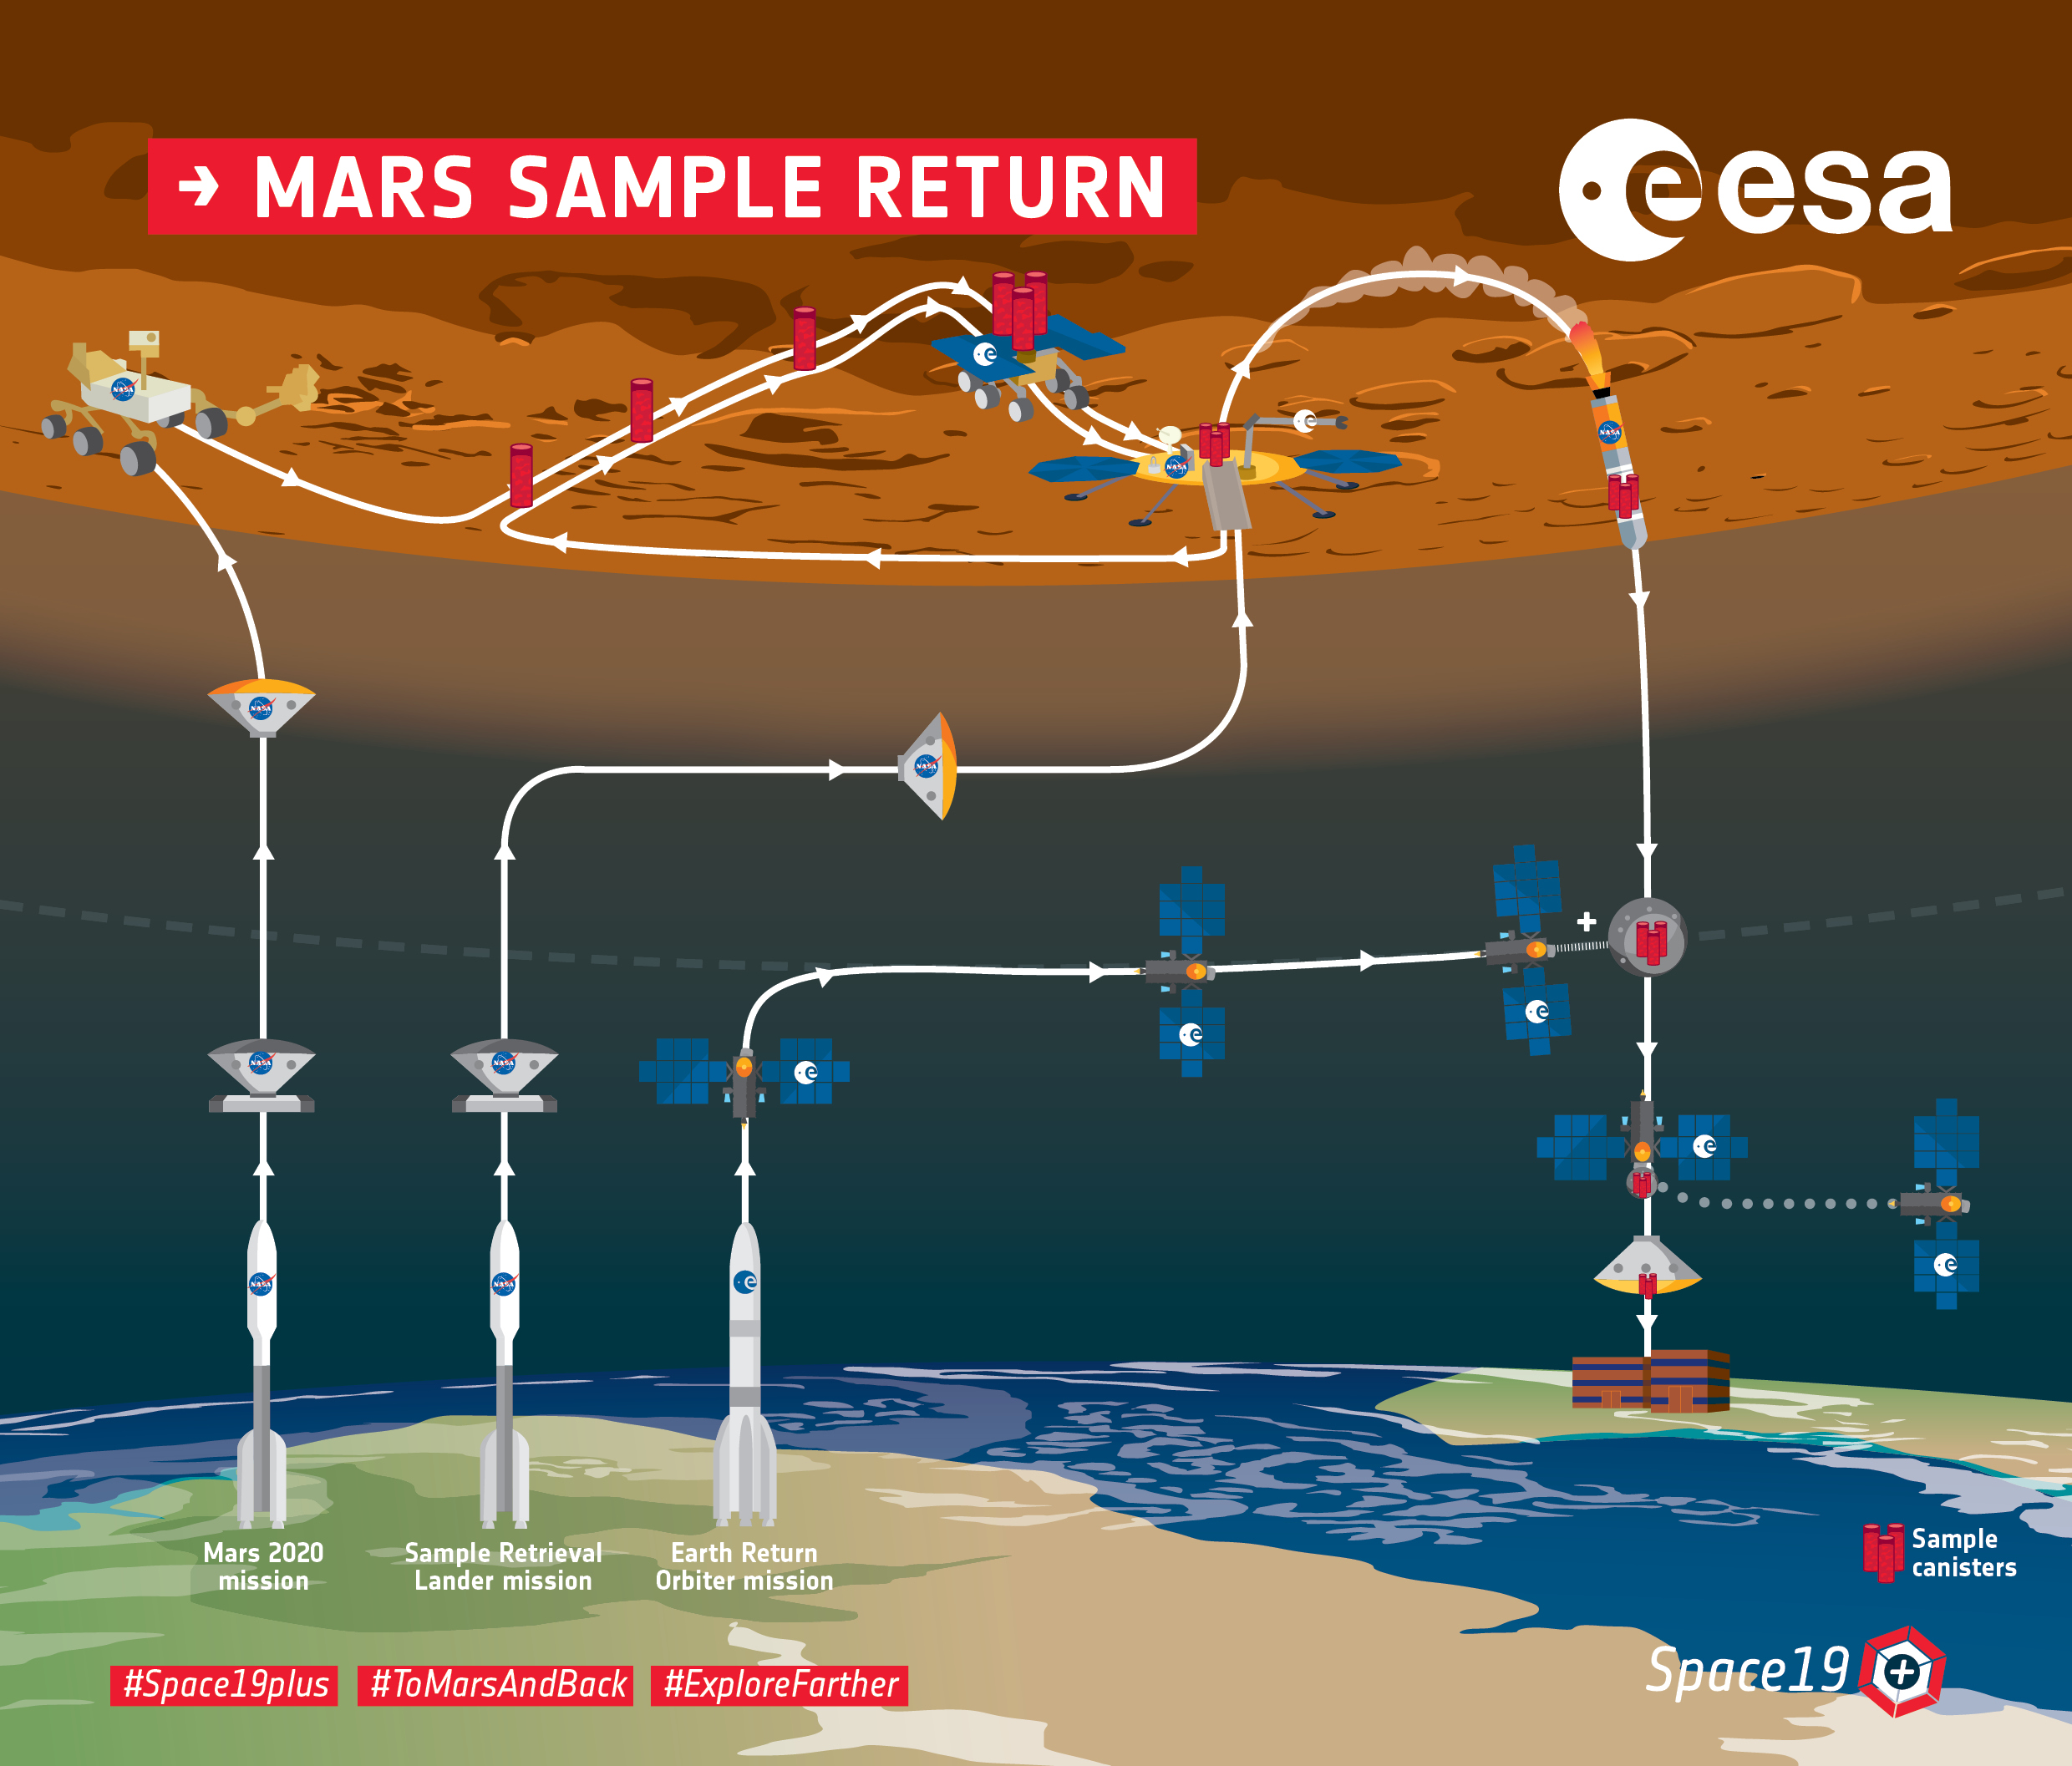 Overview of the NASA/European Space Agency Mars Sample Return mission as now foreseen.